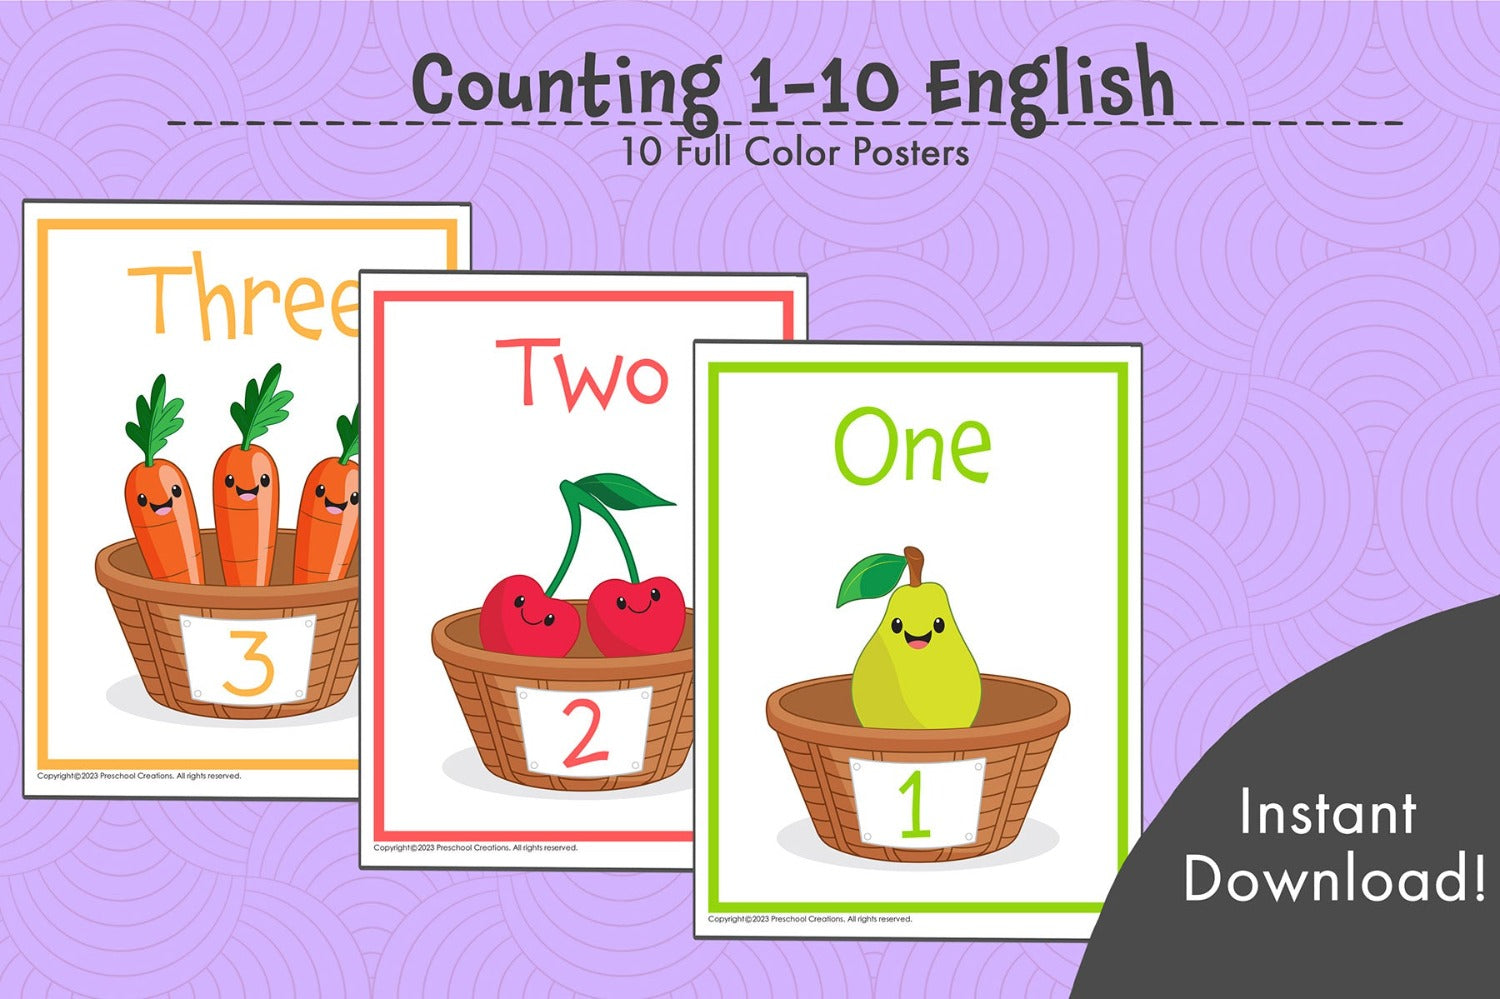 10 pages of full color posters depicting numbers 1-10 in English.   Help your children learn English numbers in a fun and engaging way with our Counting 1-10 posters in English!  With 10 full-color posters featuring numbers 1-10 in vivid English letters, accompanied by captivating illustrations, your children will learn counting quickly and easily.  What are you waiting for? Start your children on the path of learning numbers today